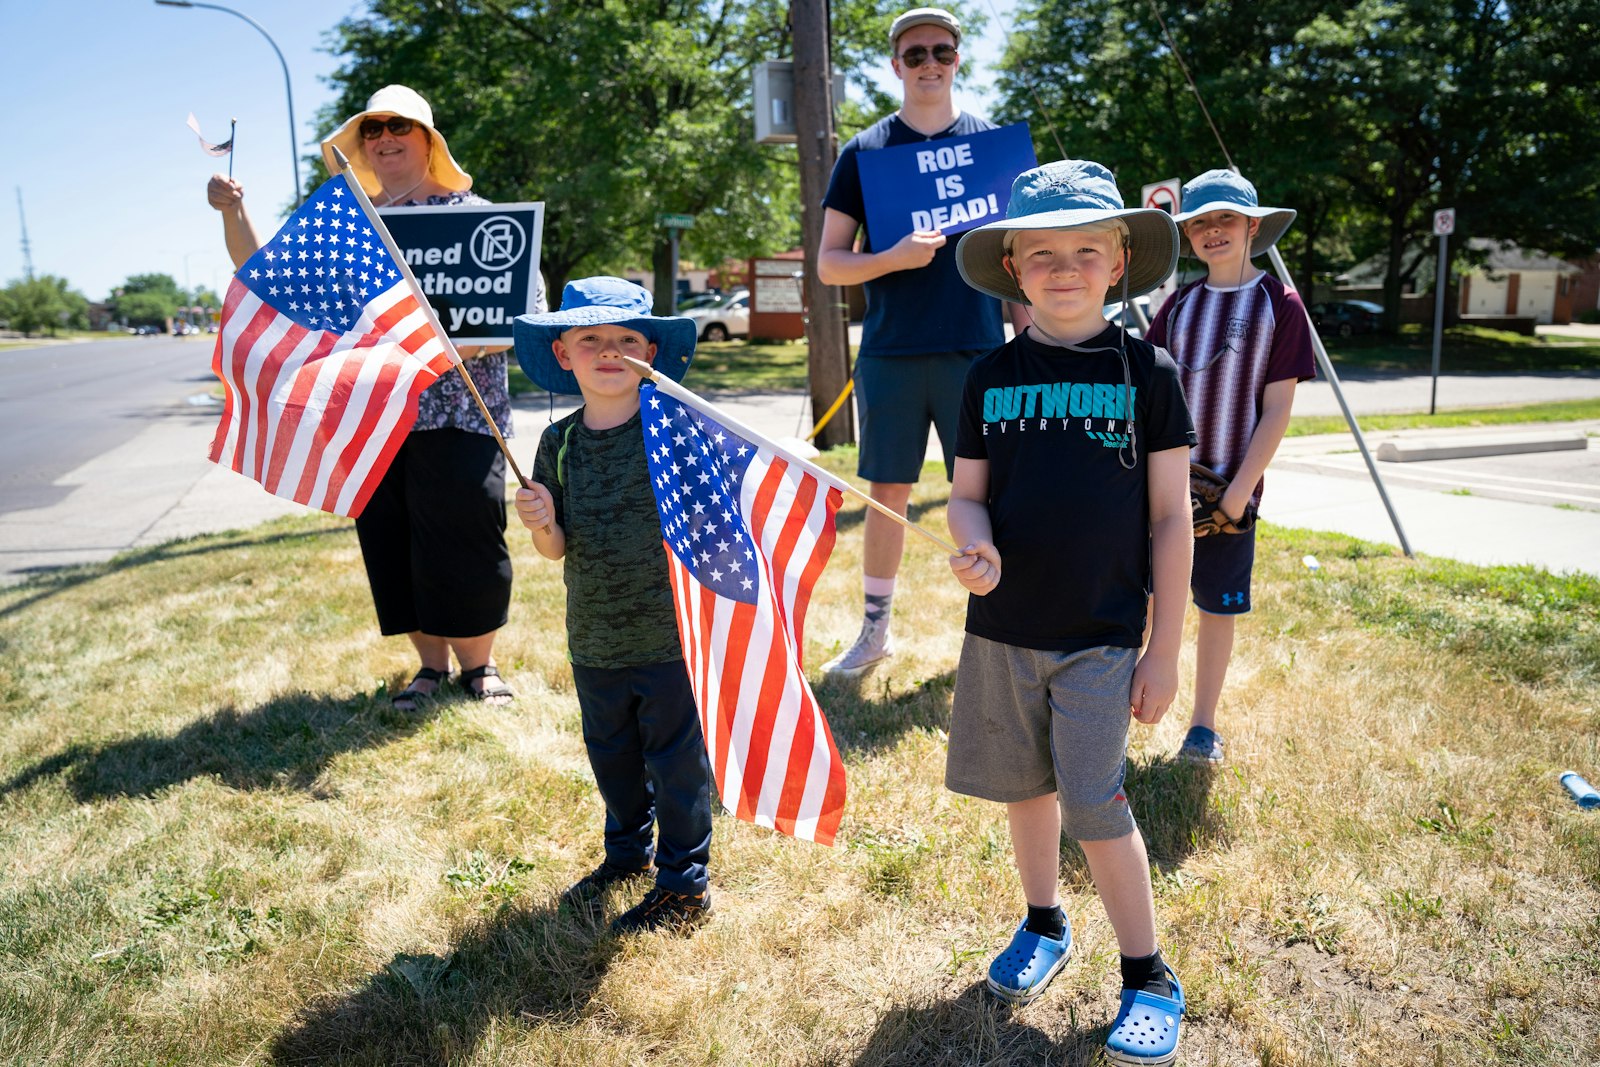 The Wilson family holds signs and American flags along Farmington Road in Livonia on June 24, hours after the Supreme Court's decision striking down Roe v. Wade.